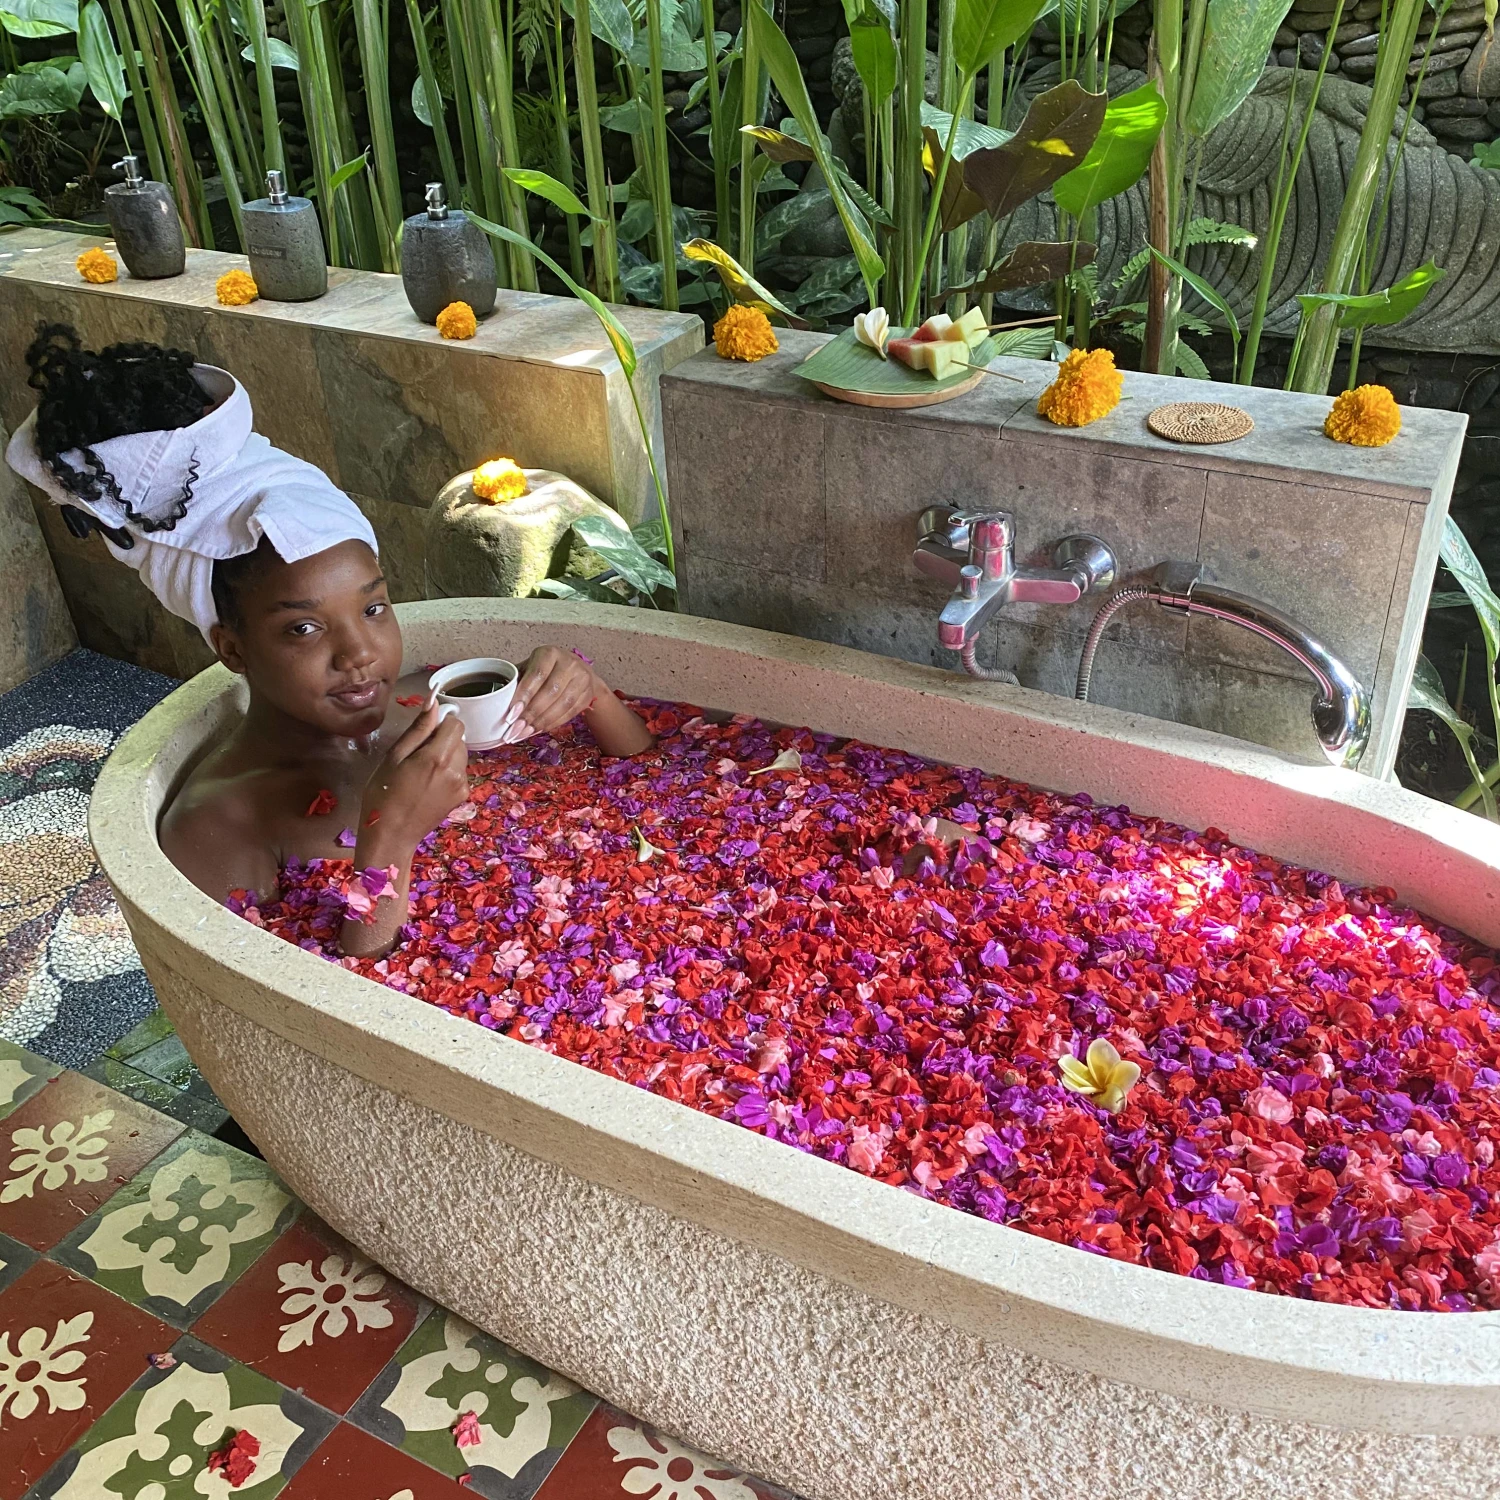 Anyah posing in a bath tub filled with water and rose petals